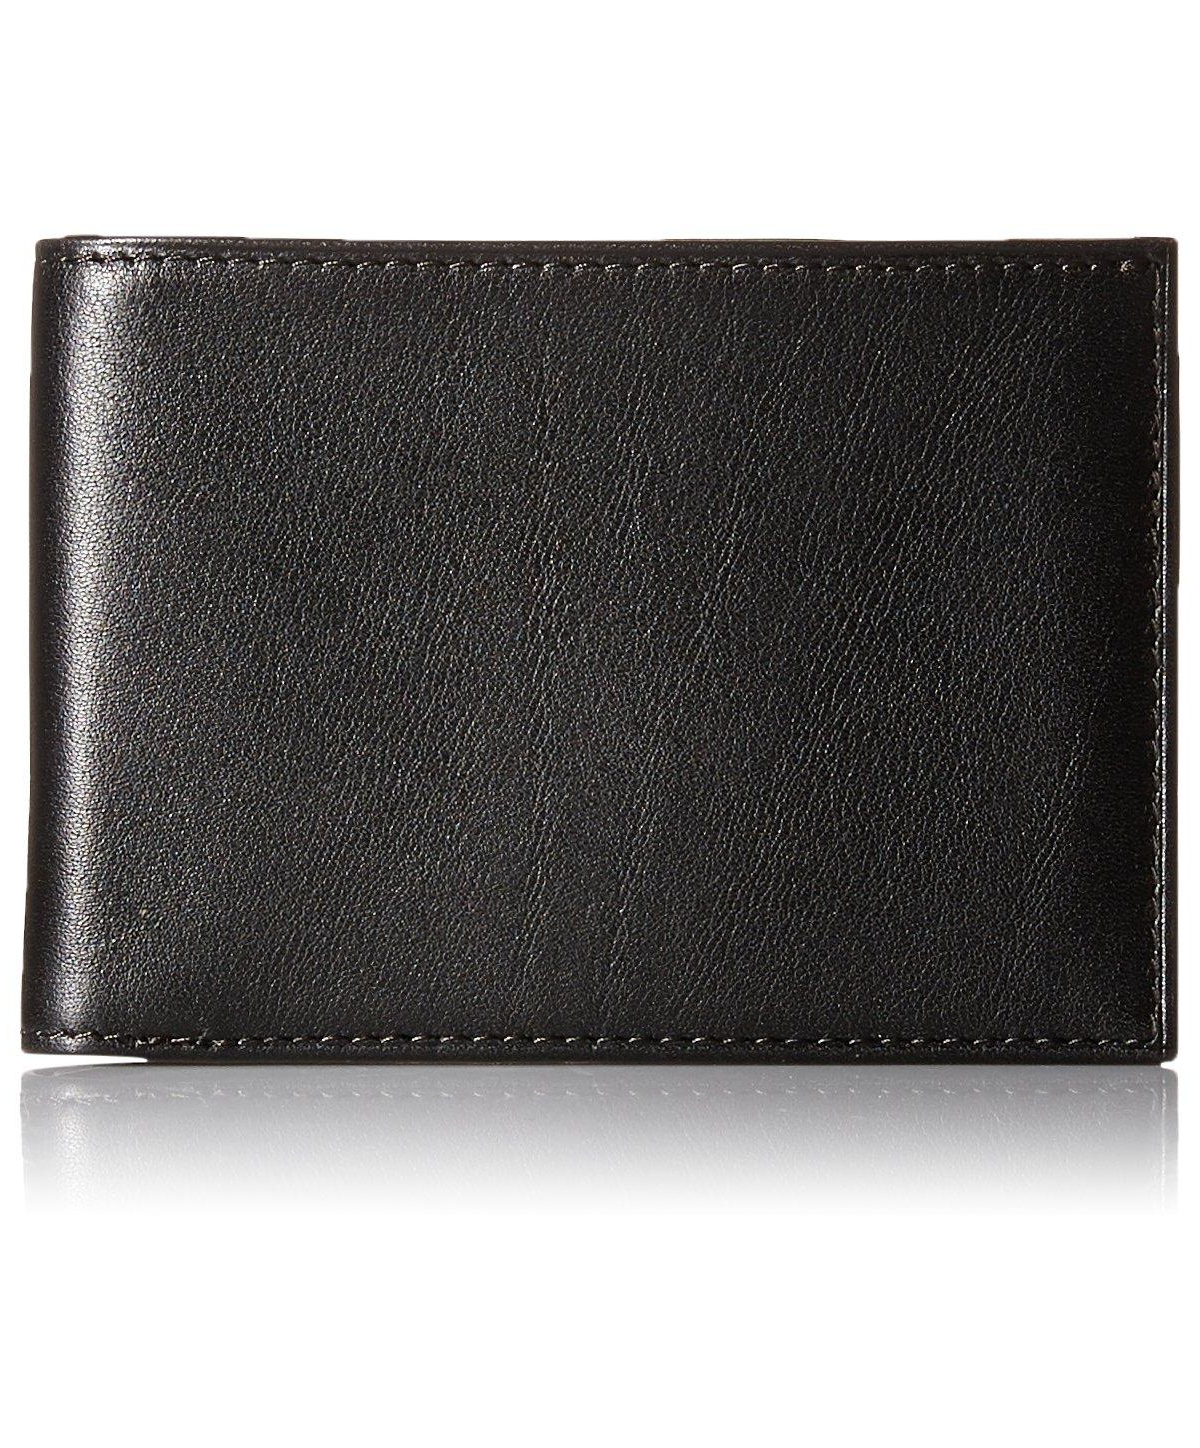 Men's Old Leather New Fashioned Collection-Small Bifold Wallet - Black leather